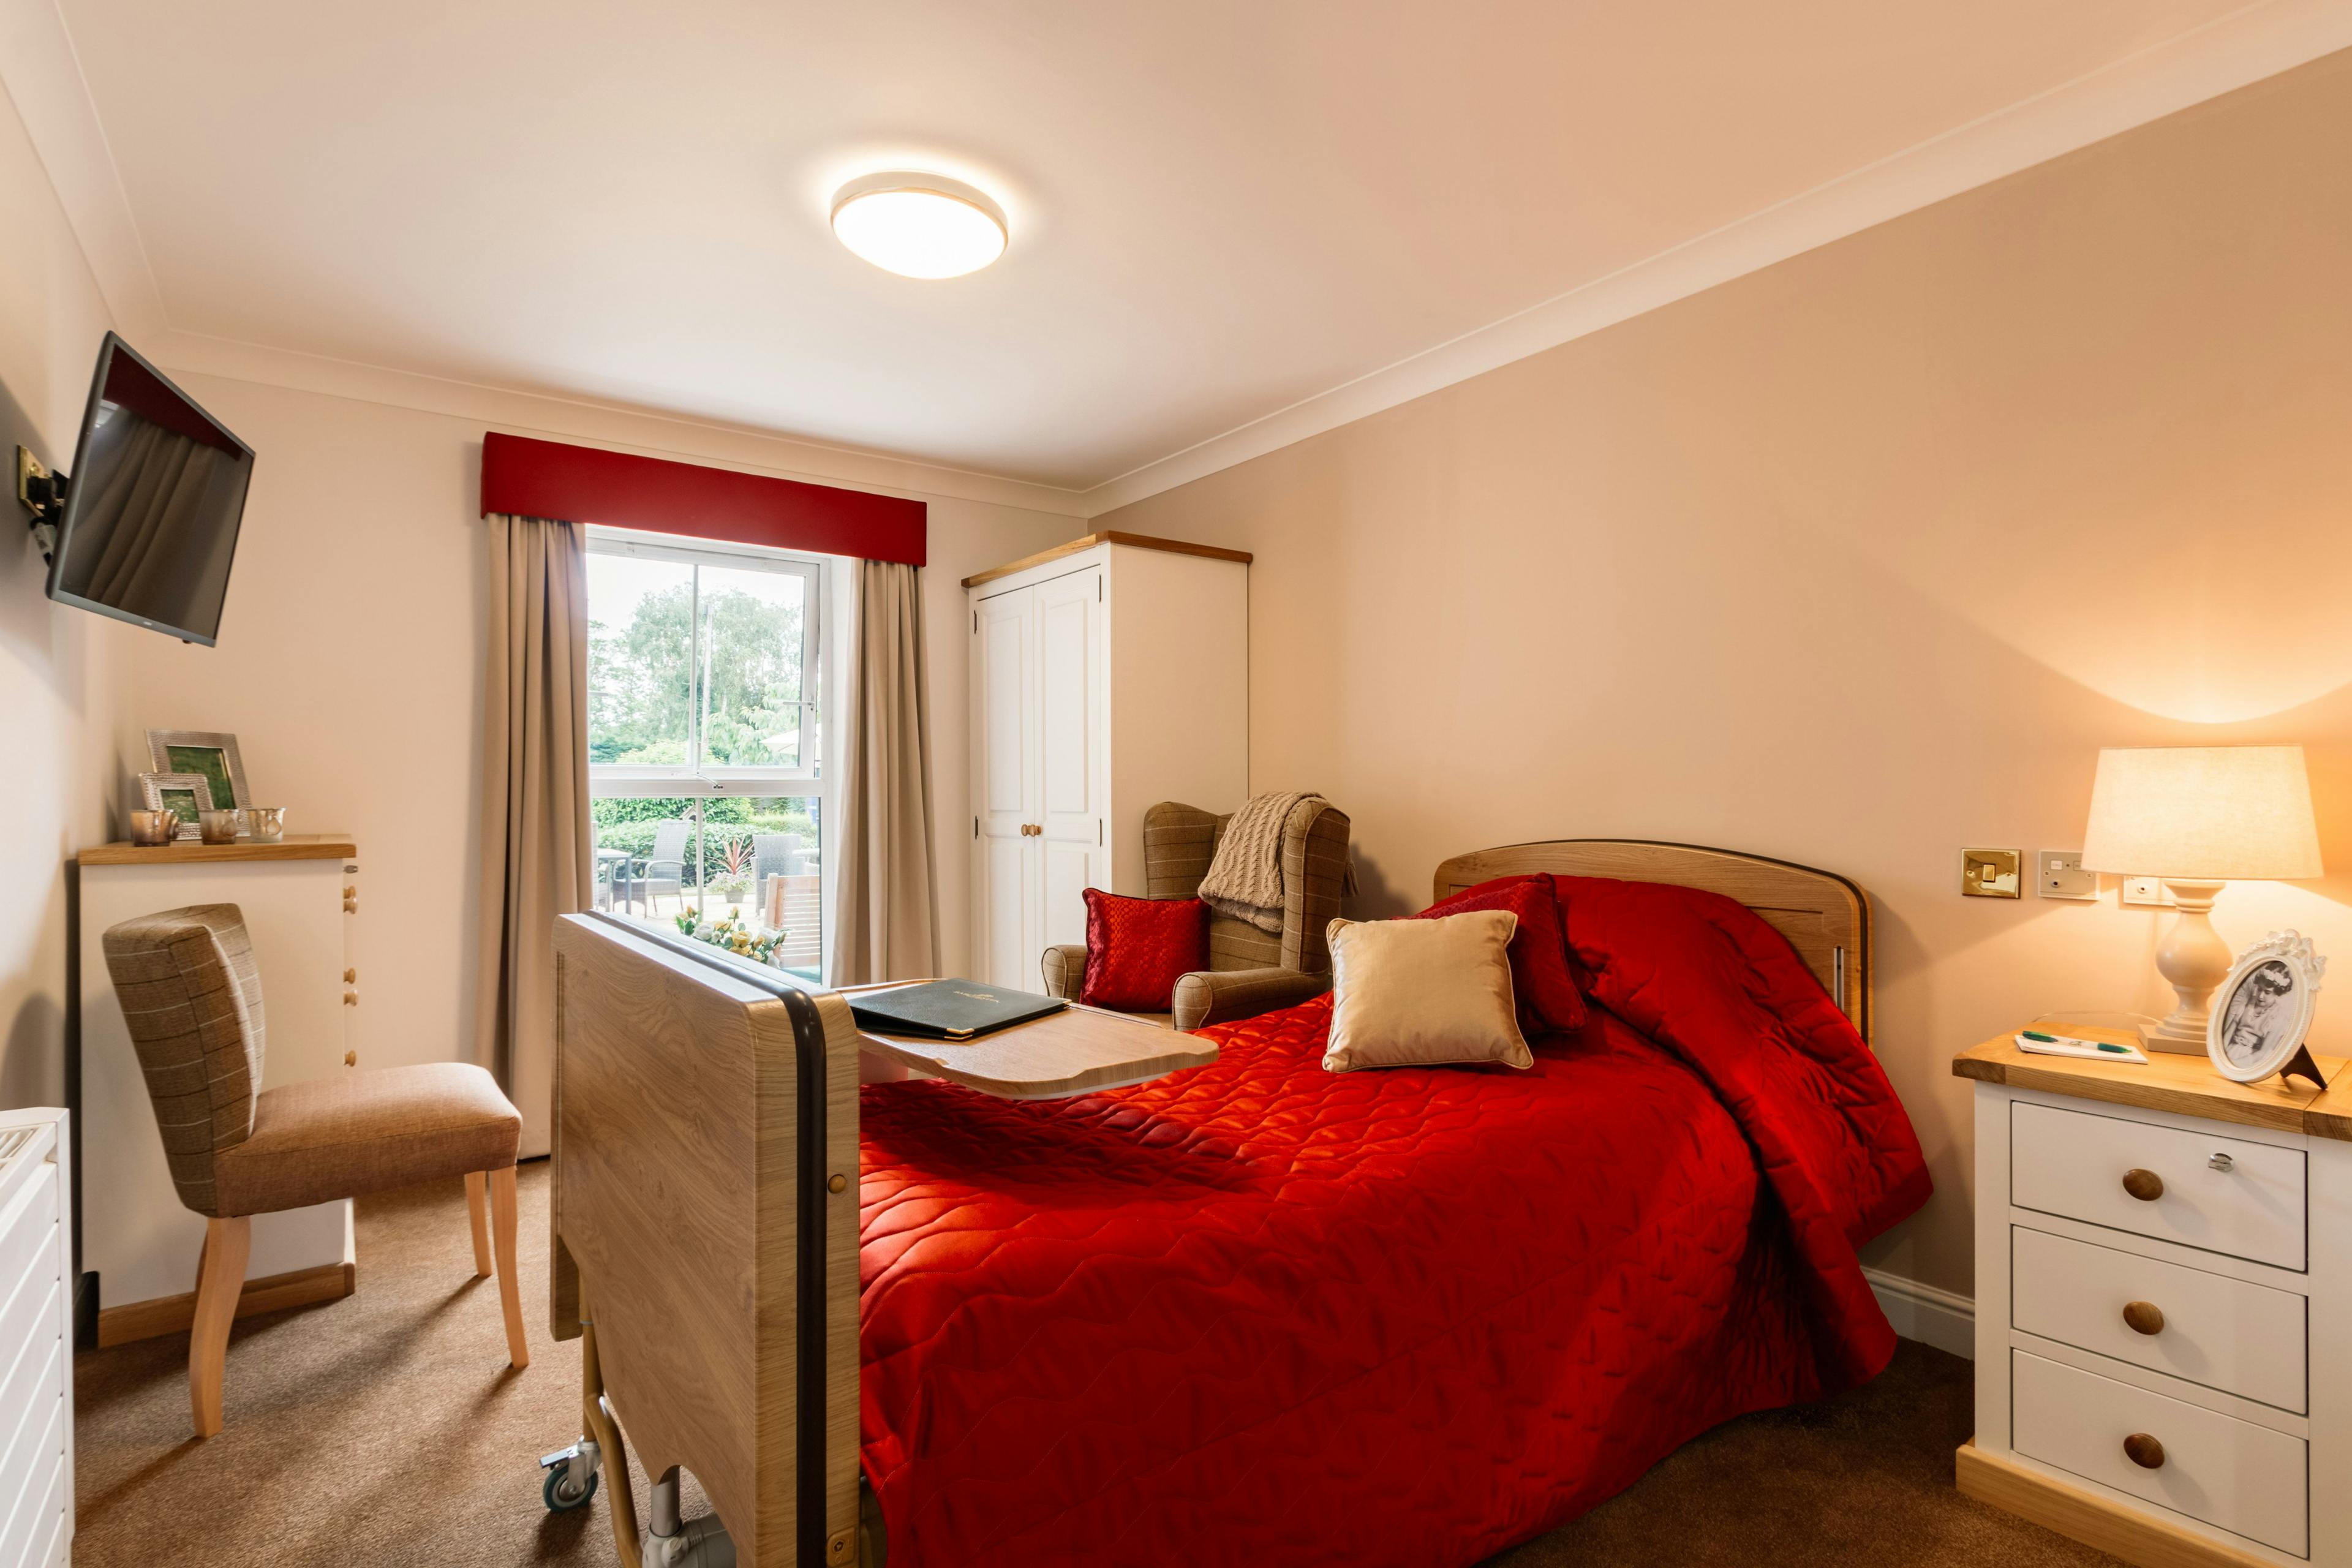 Bedroom at Stamford Bridge Beaumont Care Home in York, North Yorkshire